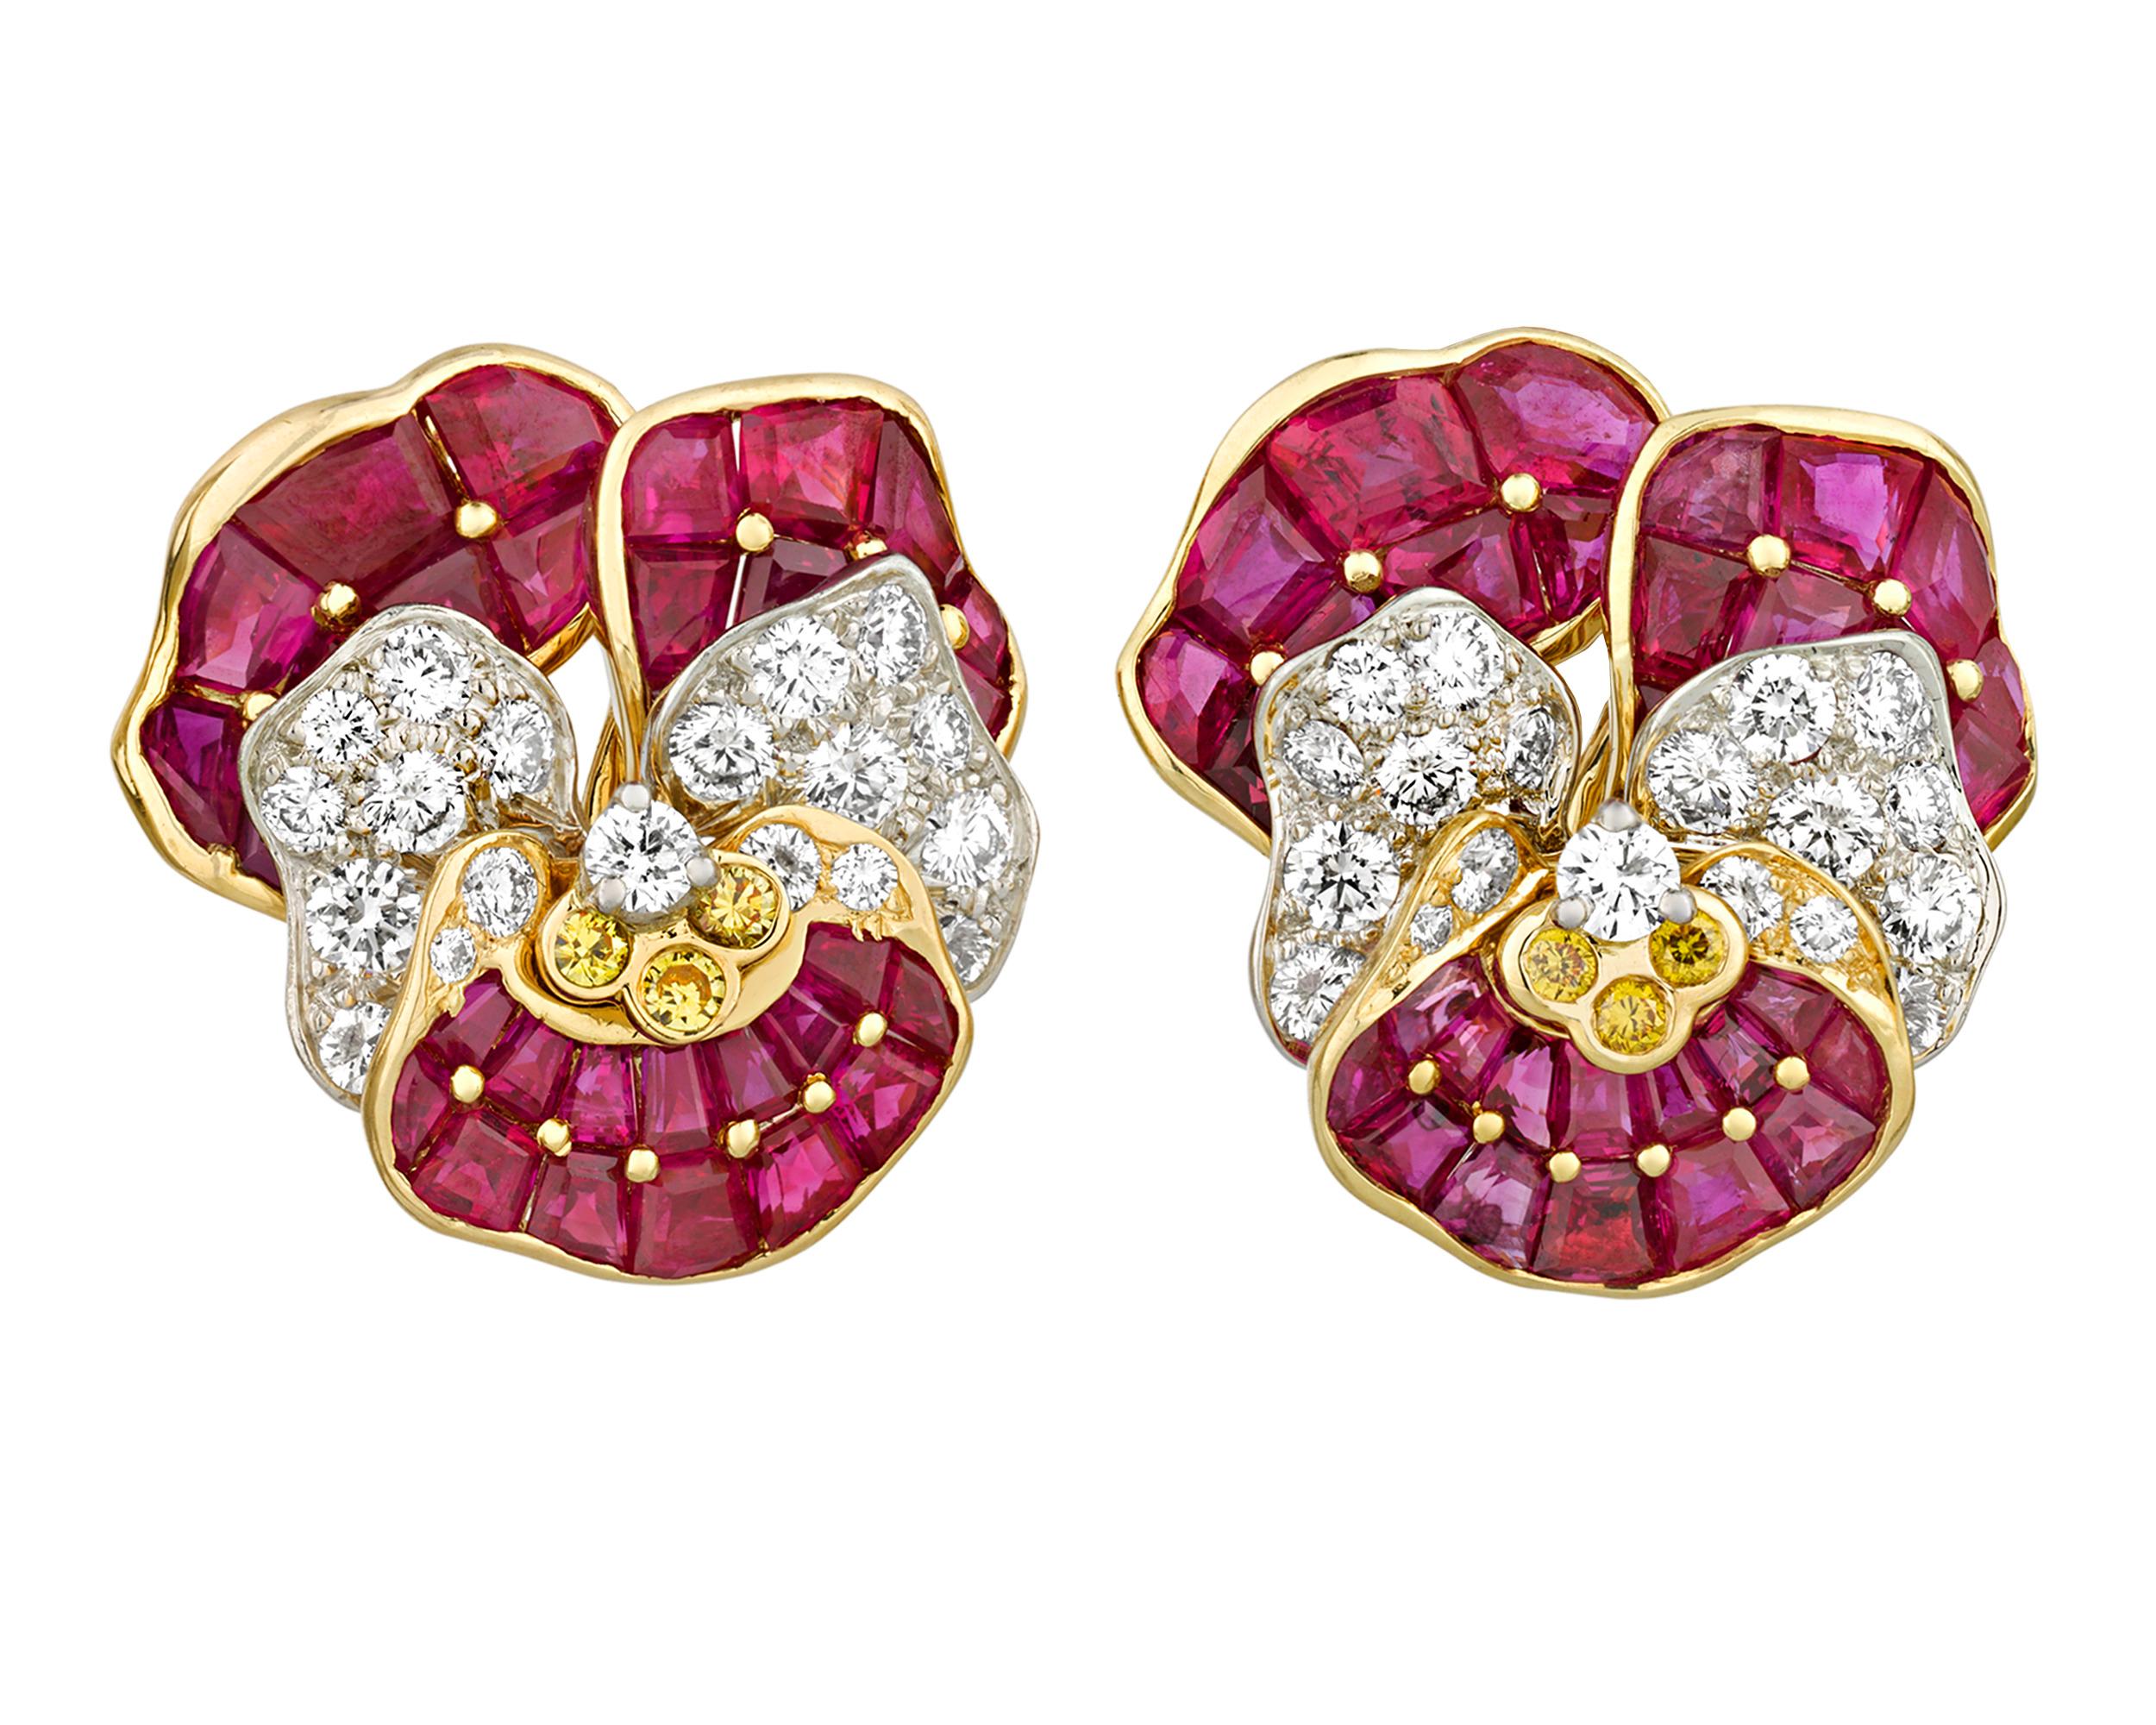 These diamond and ruby floral earrings were created by the renowned American jewelry firm Oscar Heyman. Taking the shape of a pansy, the earrings feature a remarkable 13.32 total carats of rubies complemented by white and fancy yellow diamond